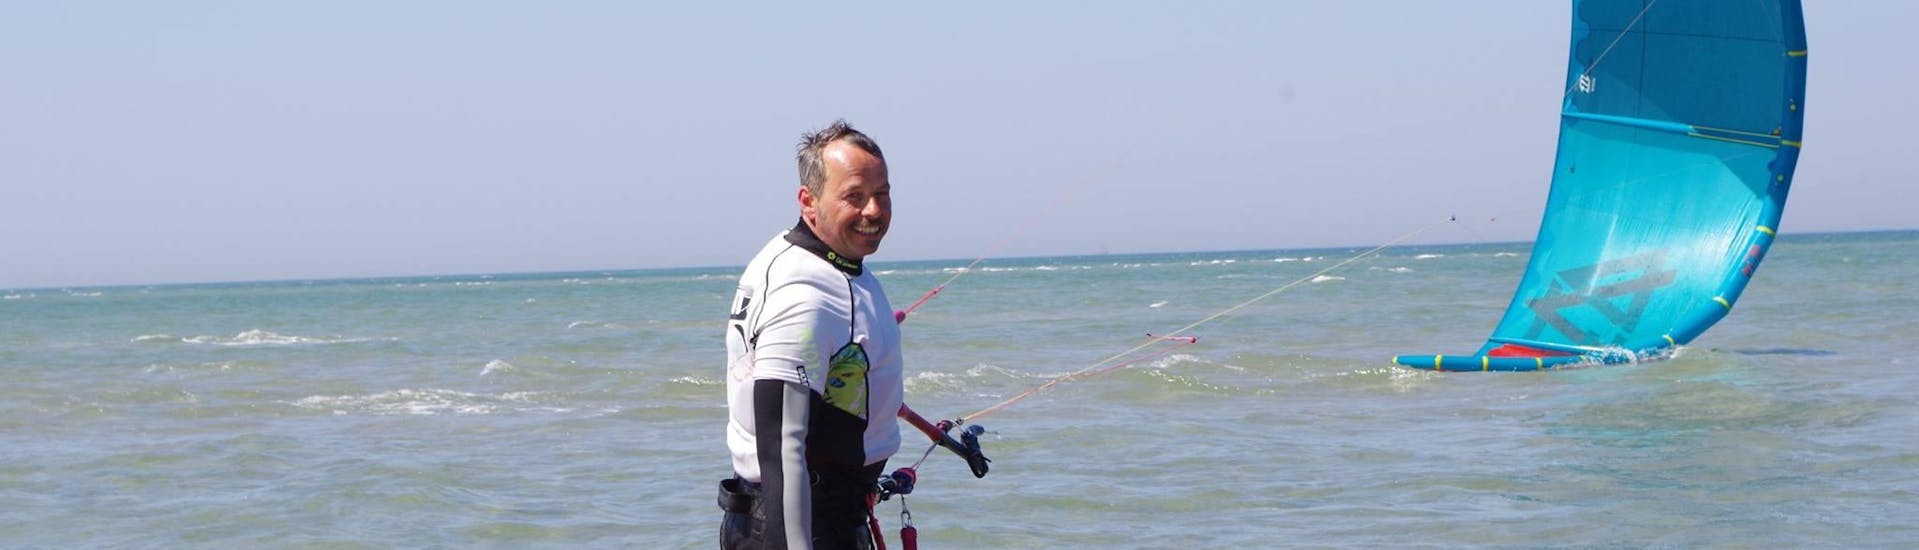 A man with his kitesurfinggear in the water during the Private Kitesurfing Coaching from 8 years in Fehmarn with Kitesurf-Guide Fehmarn.